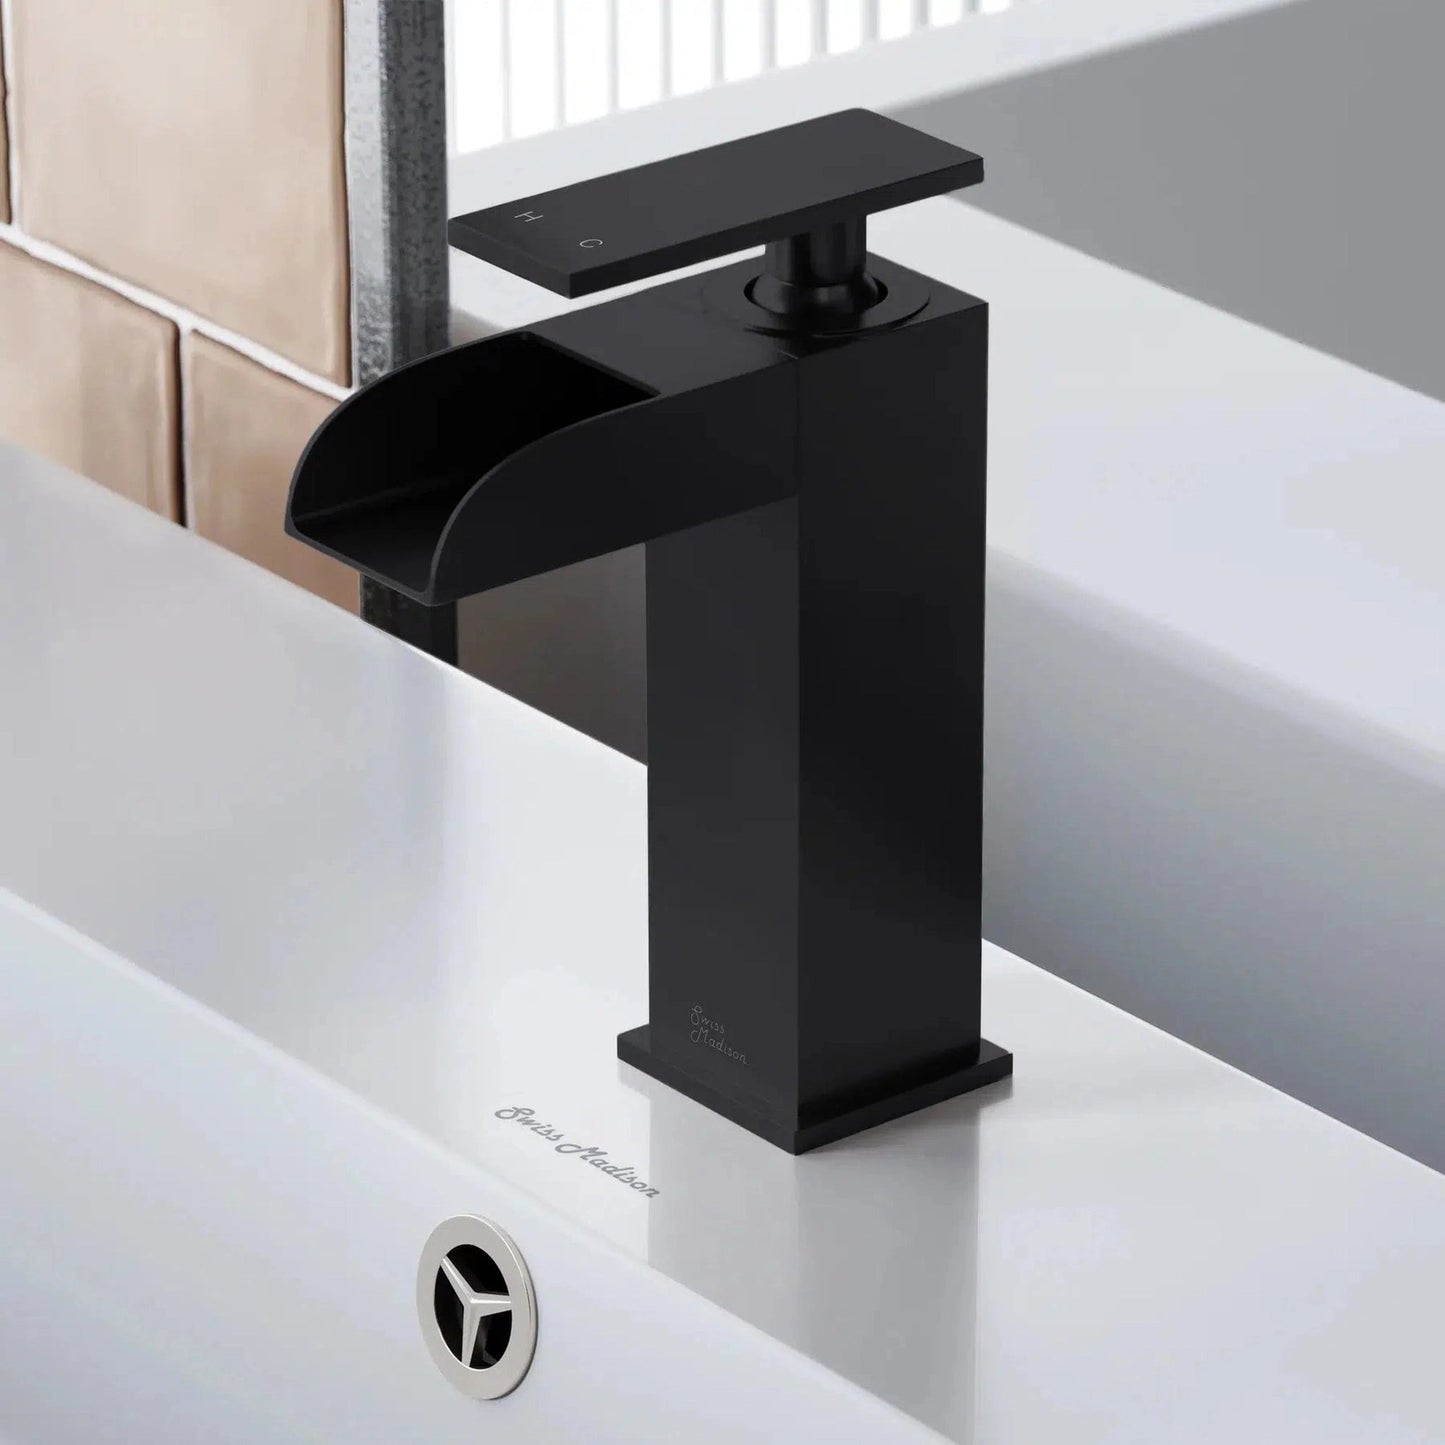 Swiss Madison Concorde 7" Single-Handle Matte Black Waterfall Bathroom Faucet With 1.2 GPM Flow Rate